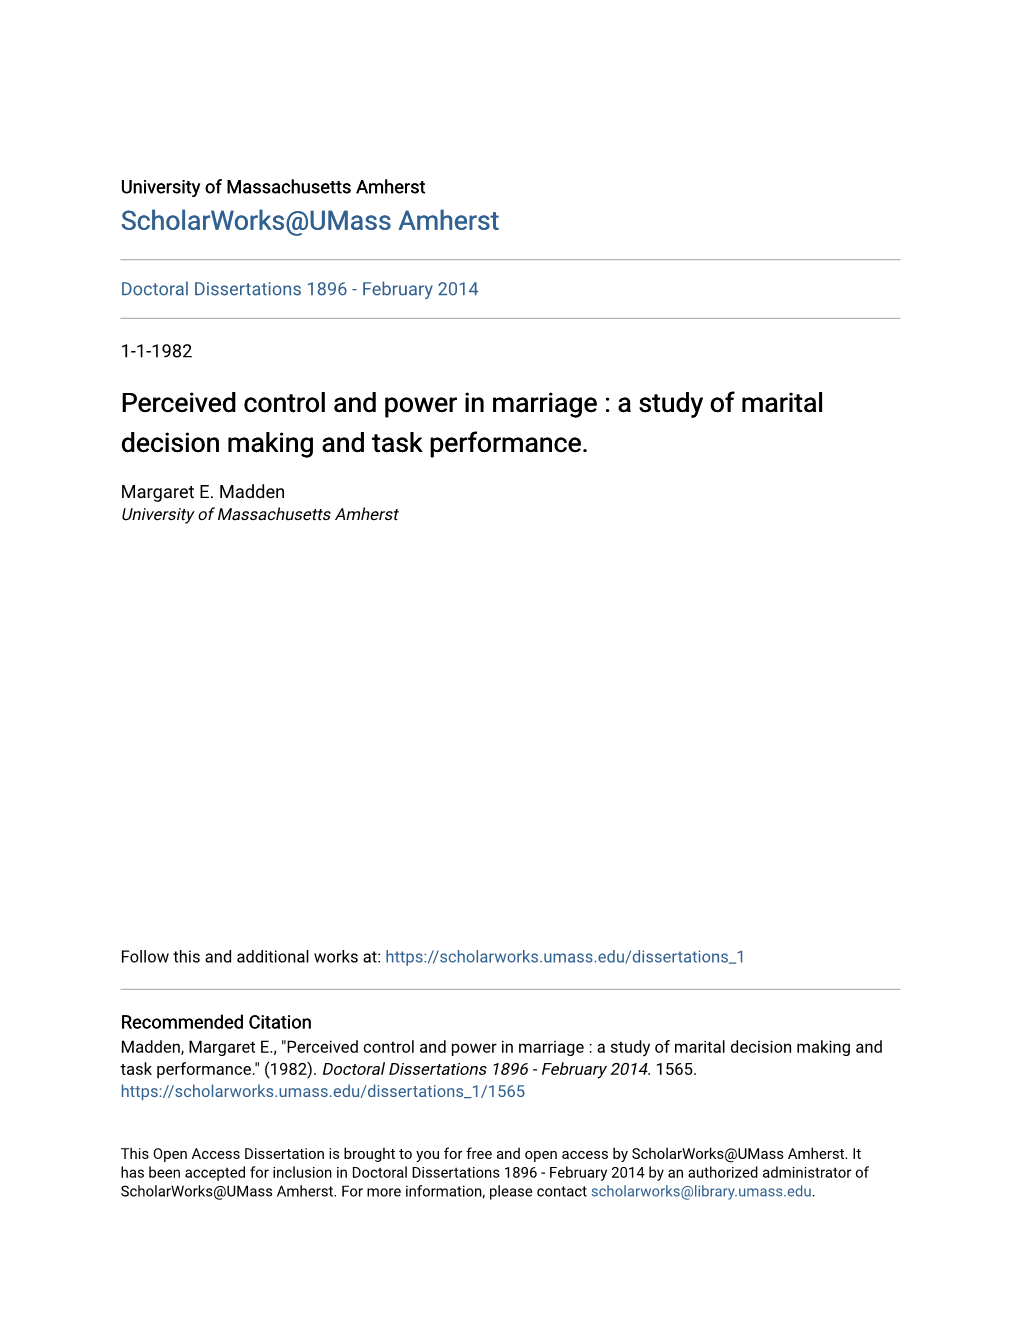 A Study of Marital Decision Making and Task Performance